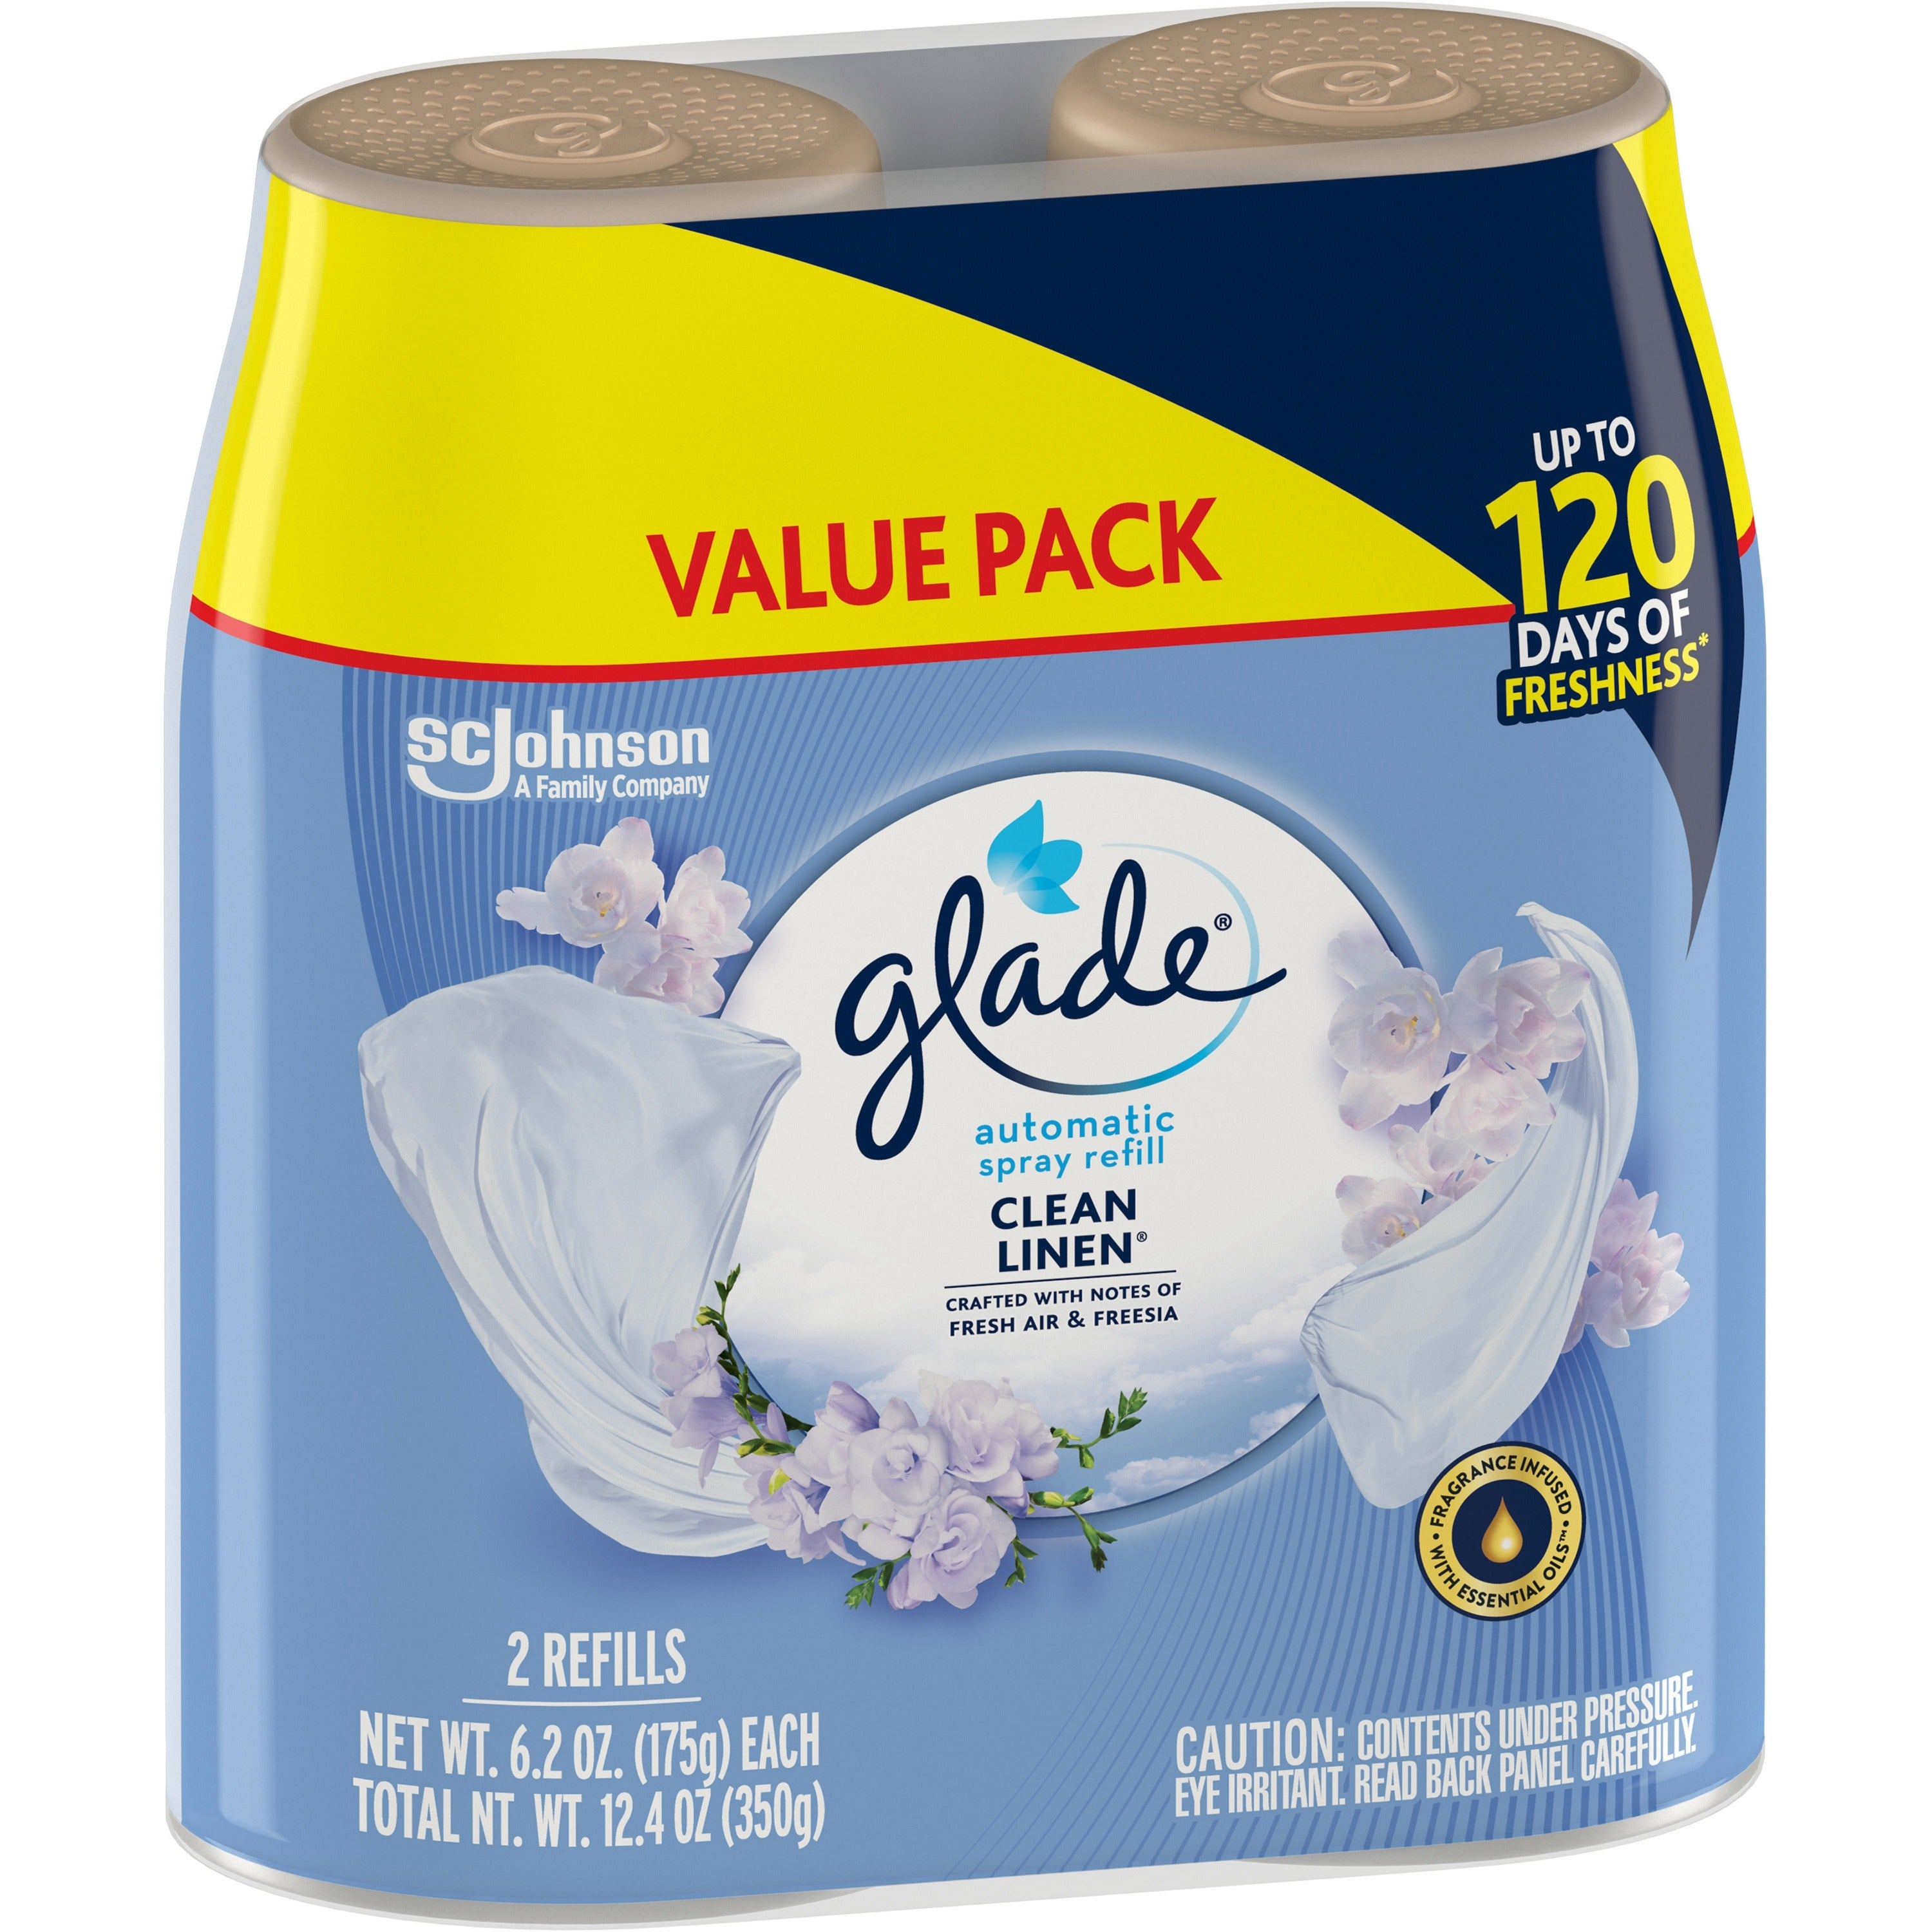 glade-automatic-spray-refill-value-pack-1240-oz-clean-linen-60-day-3-carton-long-lasting-phthalate-free-paraben-free-formaldehyde-free_sjn329388ct - 5